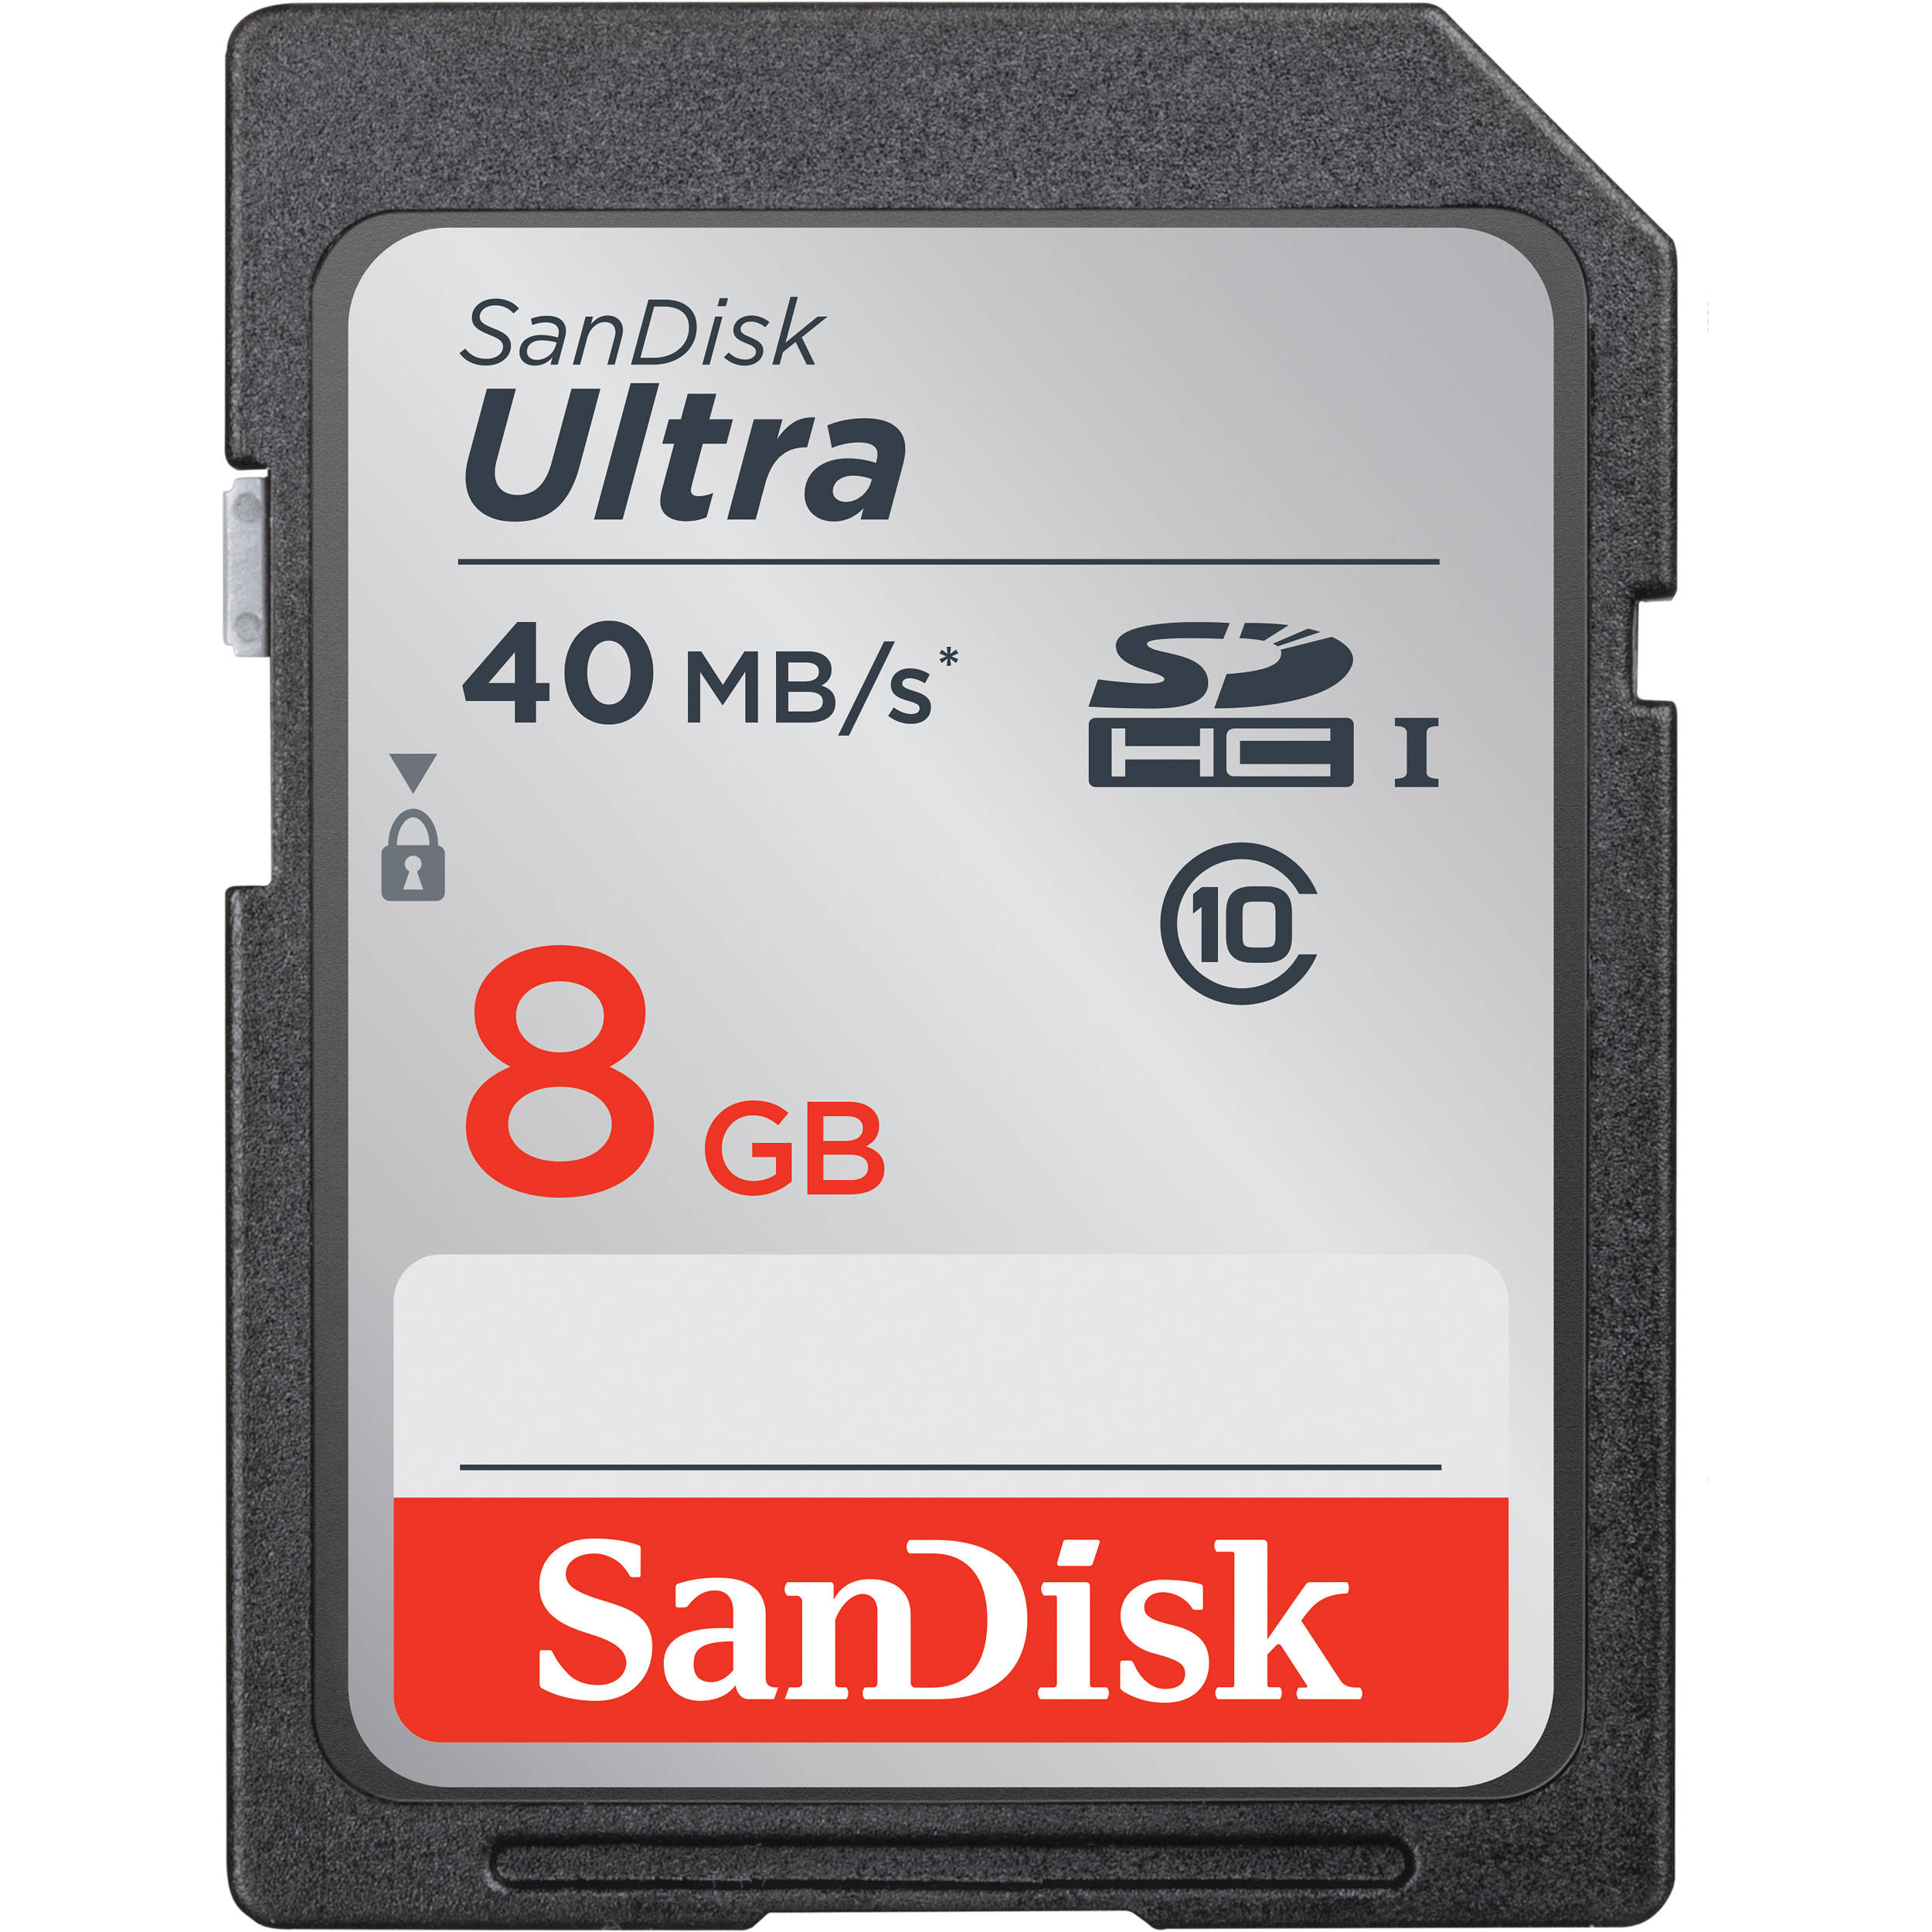 SanDisk 8GB Ultra SDHC Memory Card (40 MB/s)